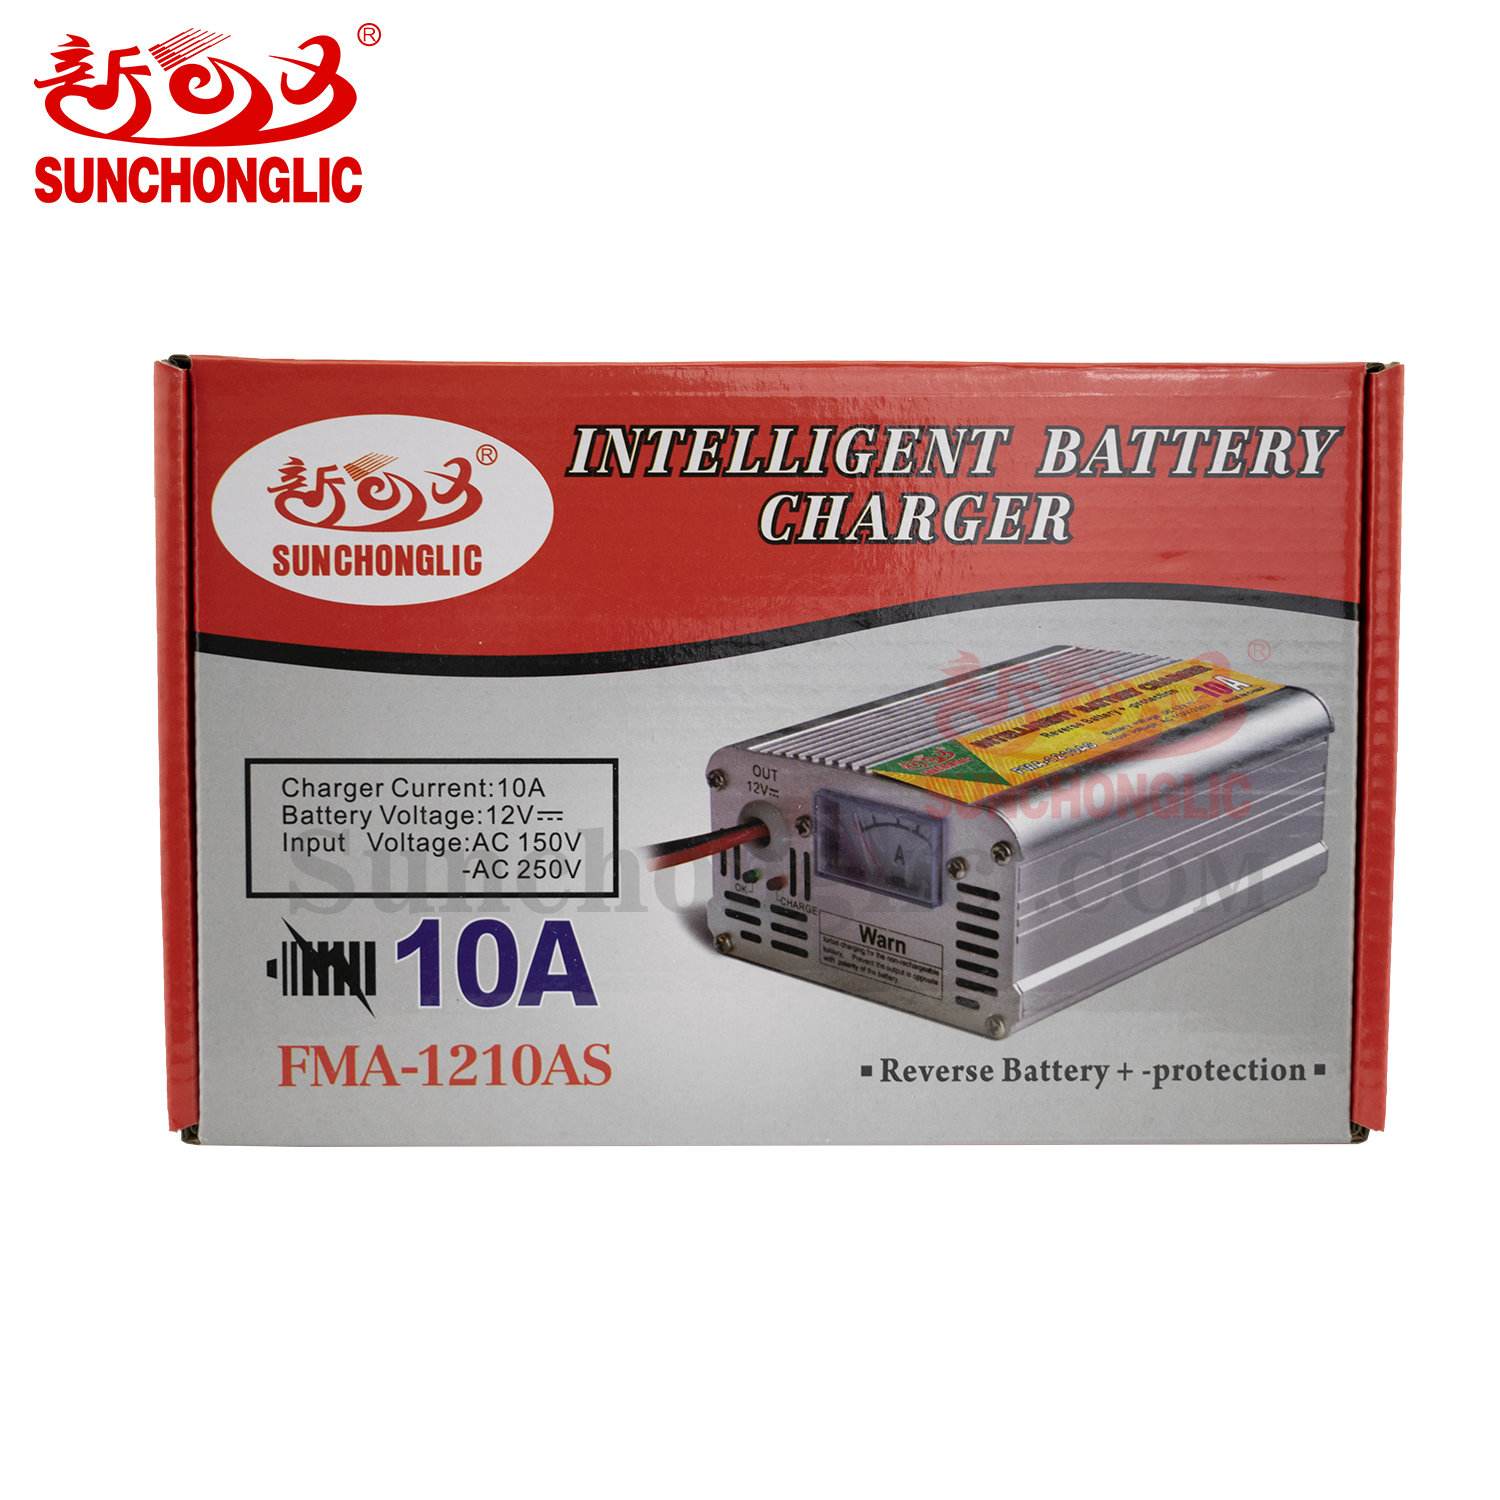 AGM/GEL Battery Charger - FMA-1210AS